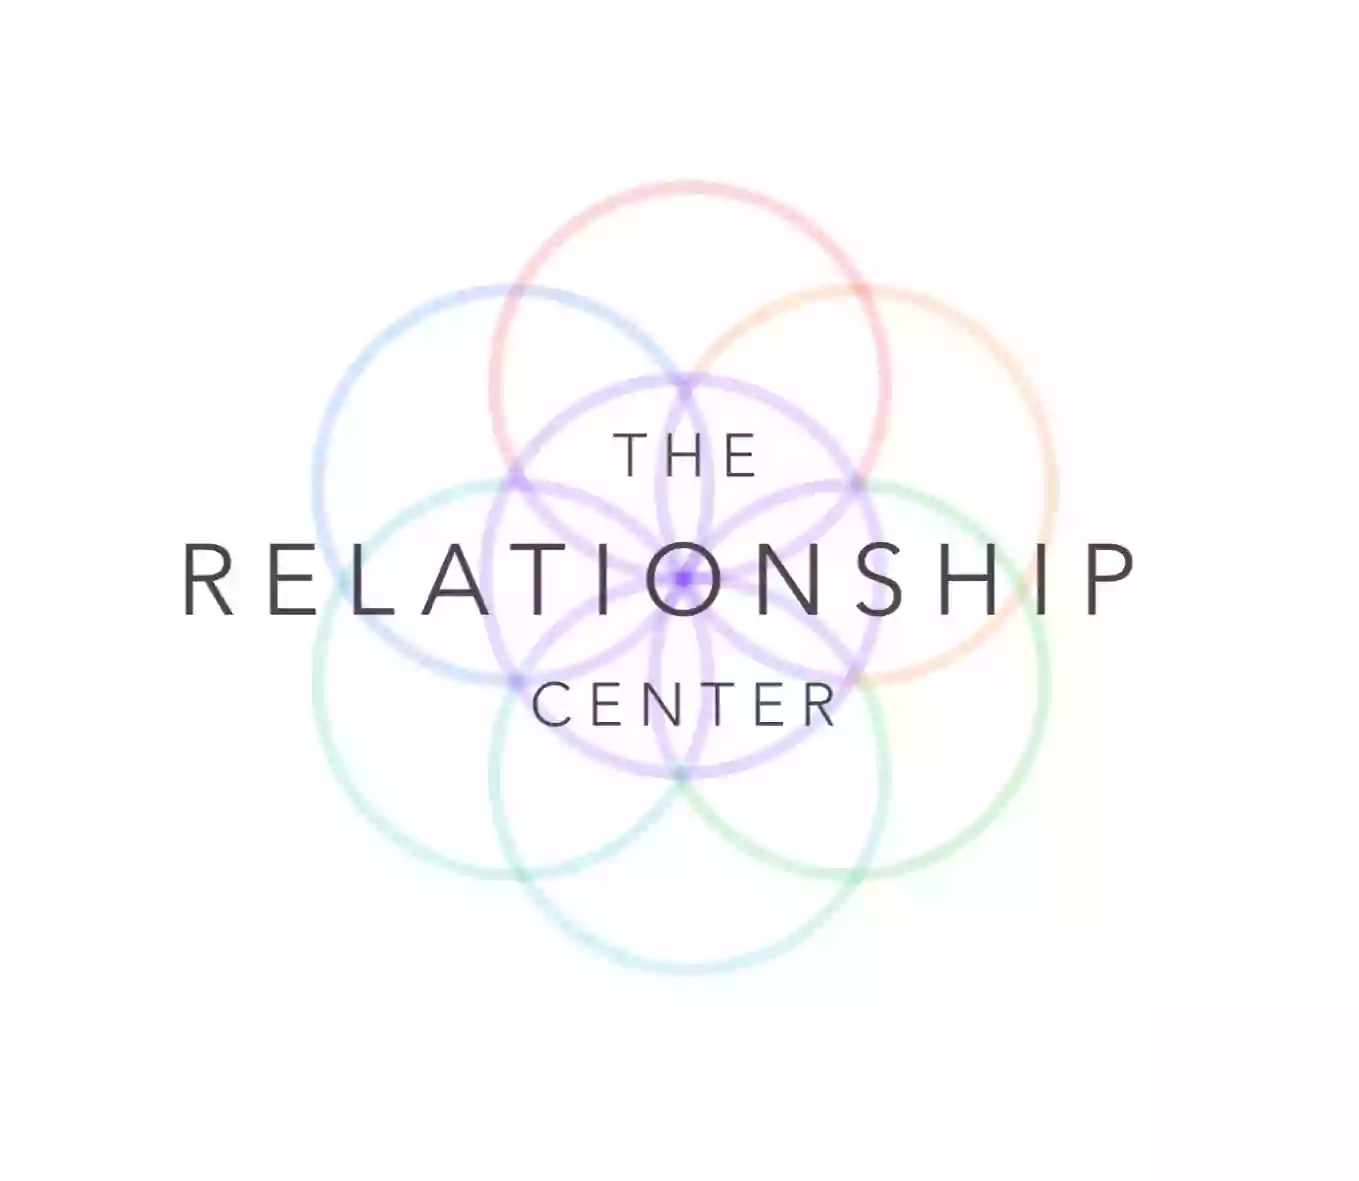 THE RELATIONSHIP CENTER